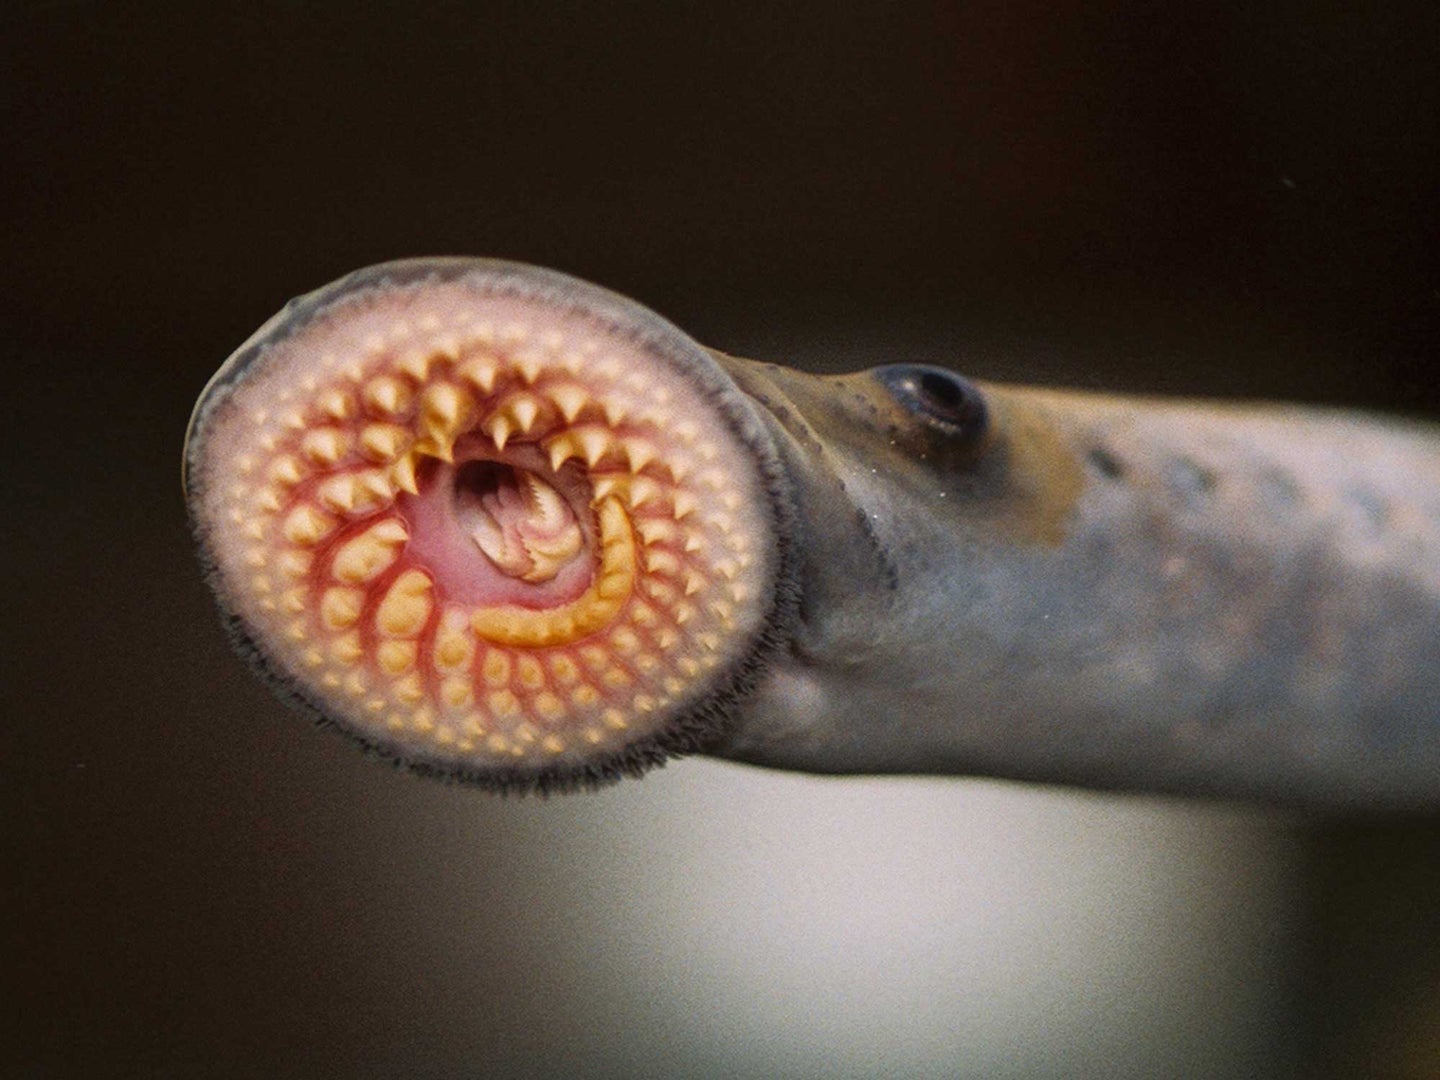 Top: Experts predict there will be at least a temporary surge to lamprey populations in the lakes following a dip in control efforts during the early stages of the Covid-19 pandemic.